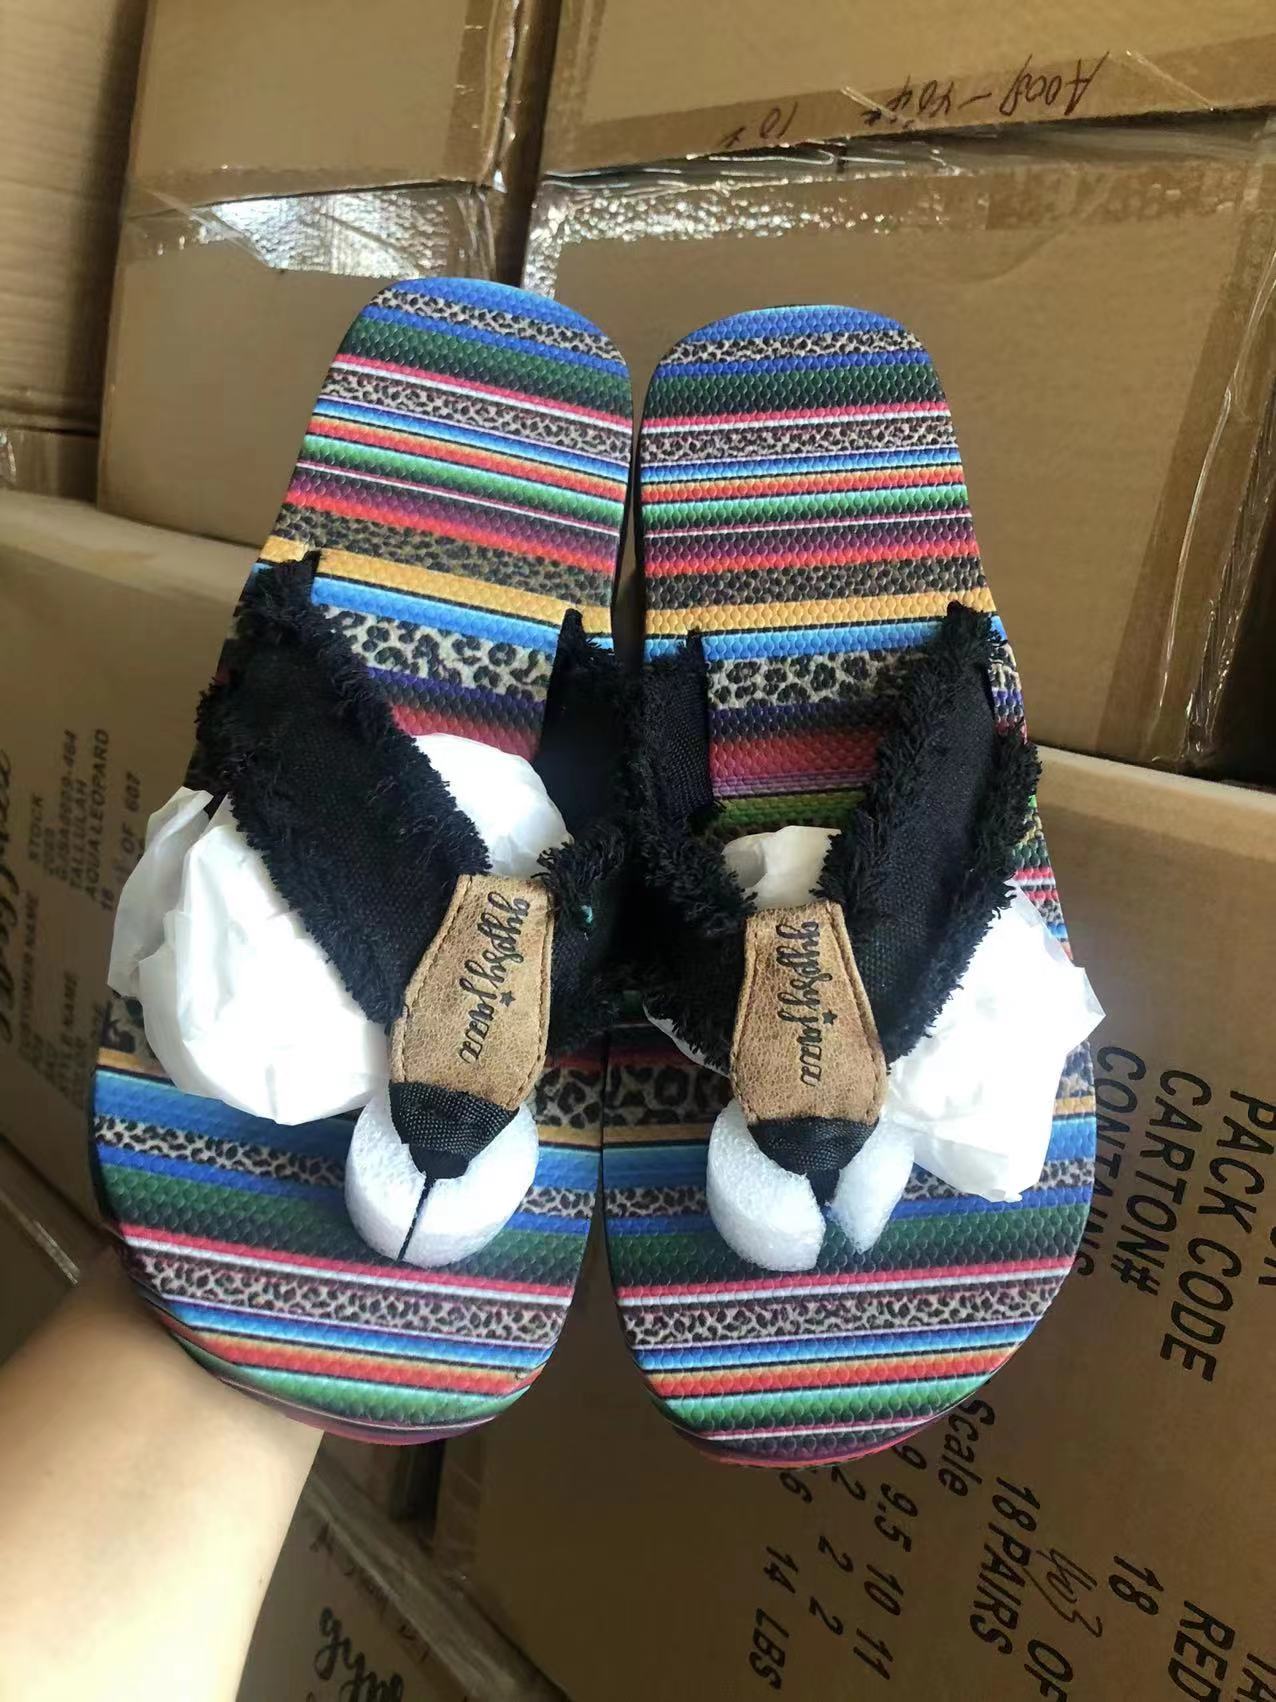 Stockpapa Stock Clearance Sale in China Pretty Slipper 